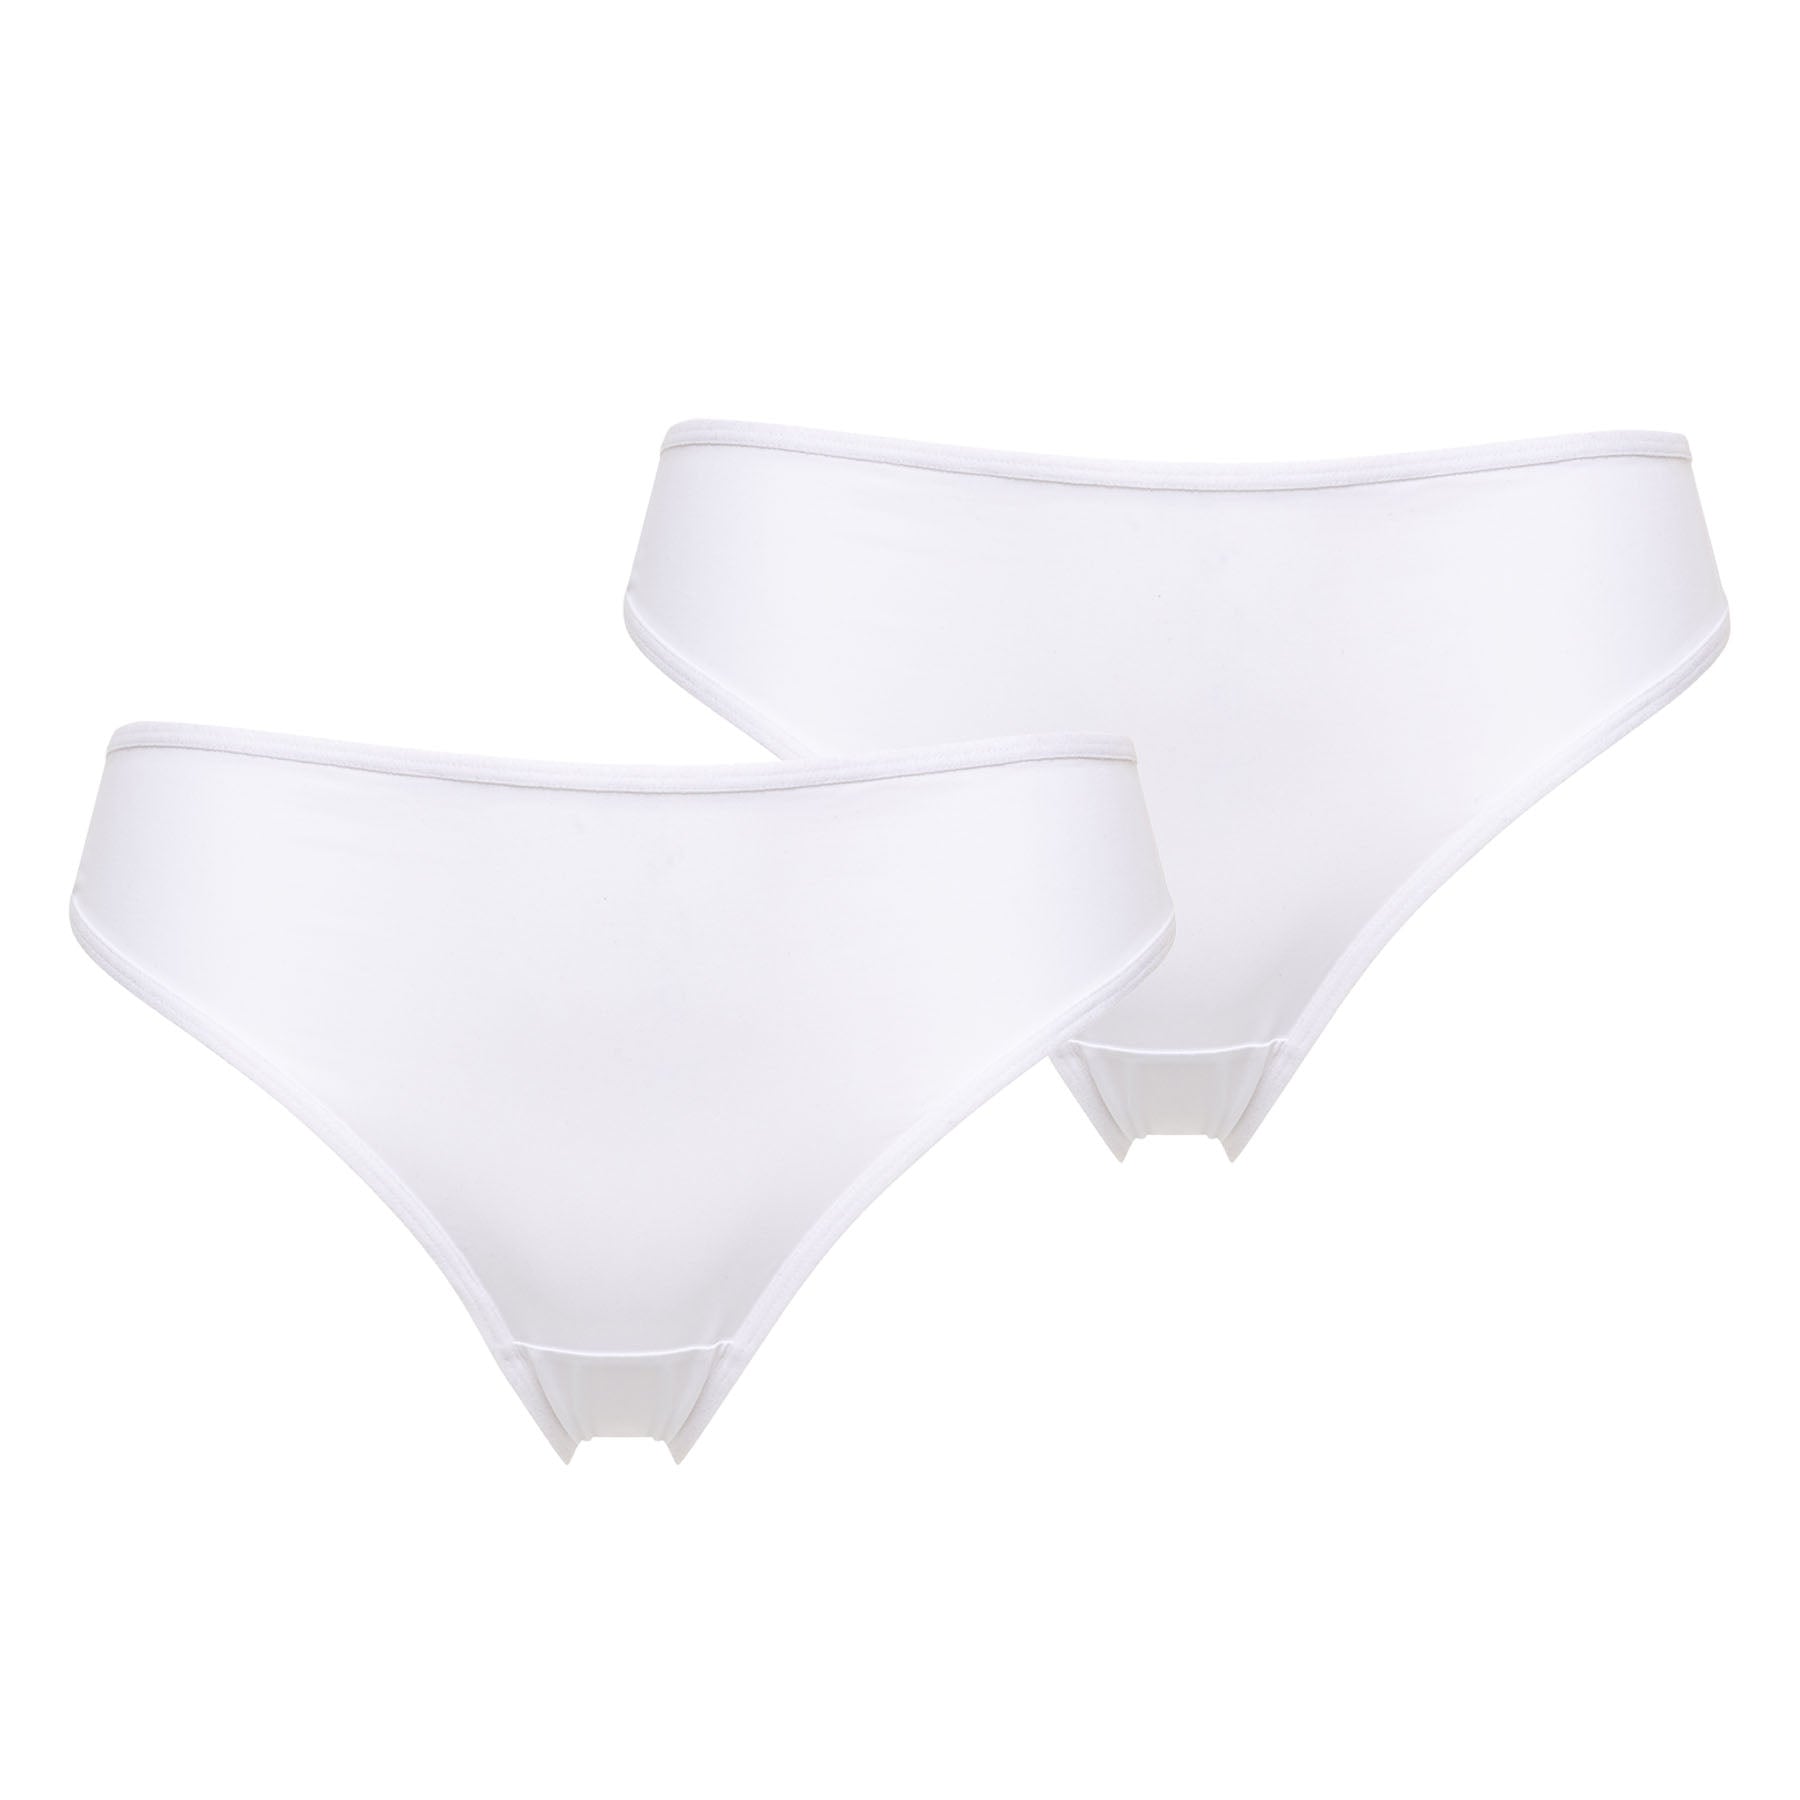 Briefs - Pack of 2 Double Charme White+White 